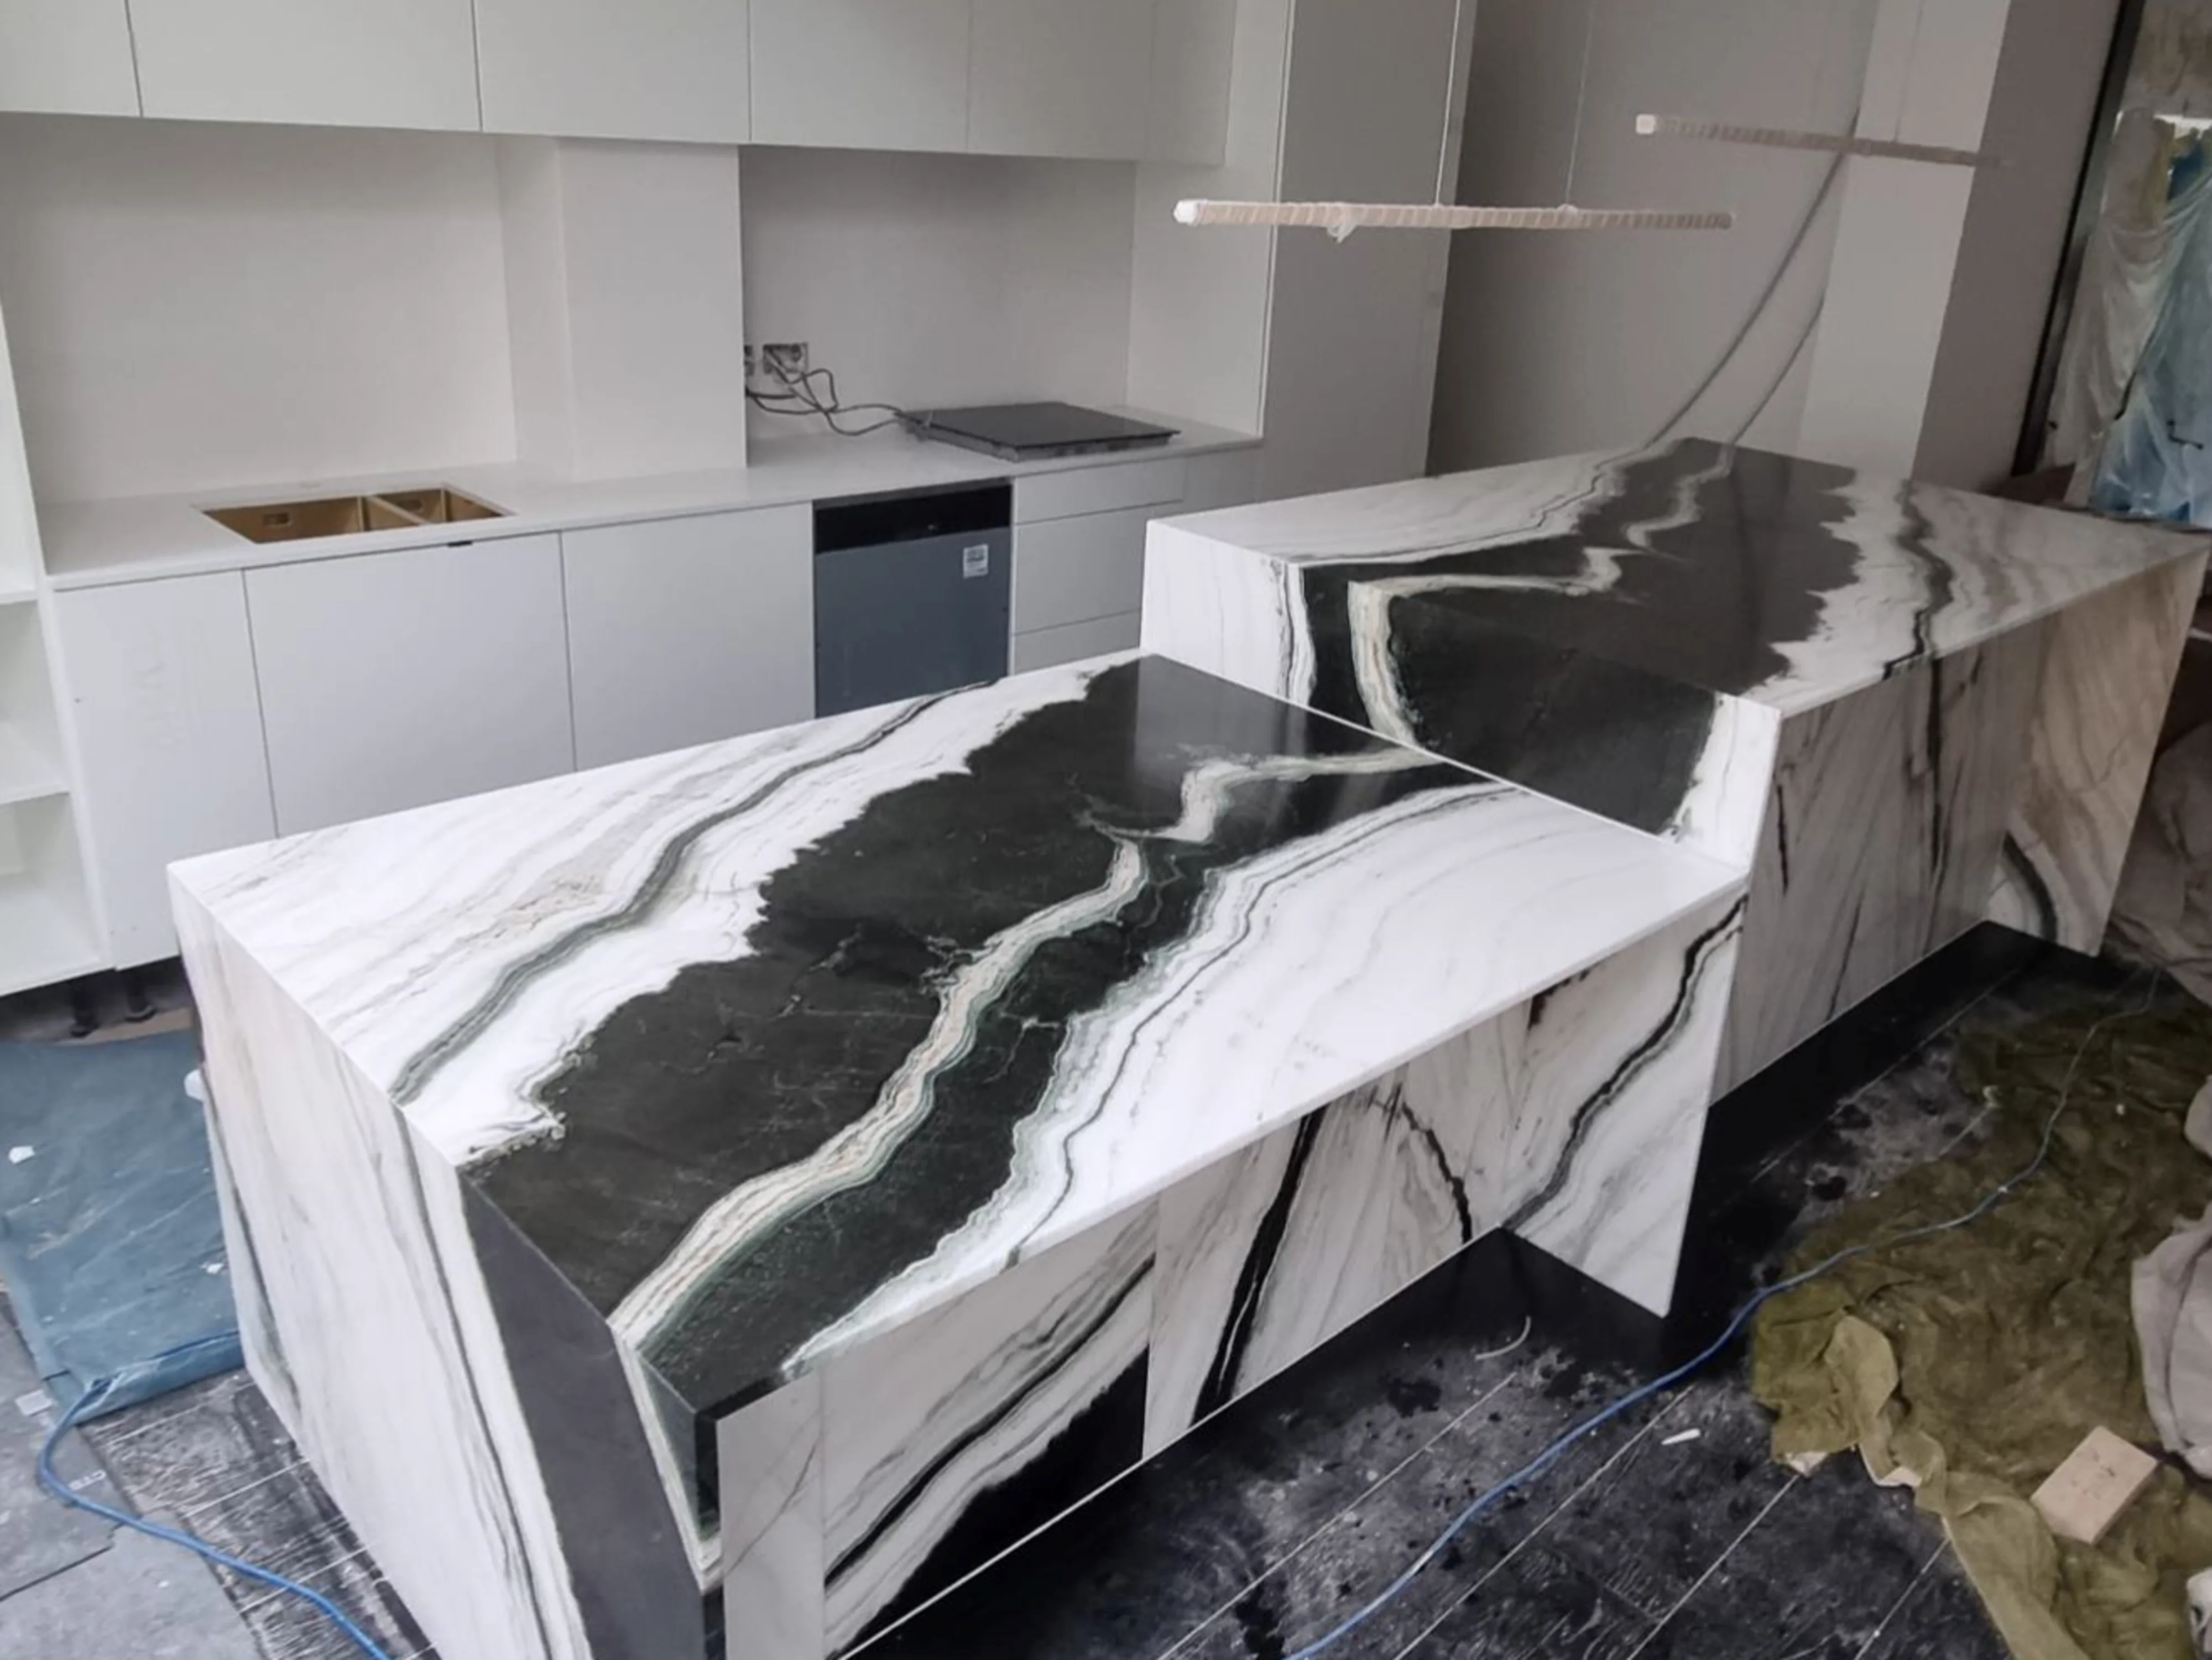 Two panda white marble worktops that have just been installed in a kitchen.